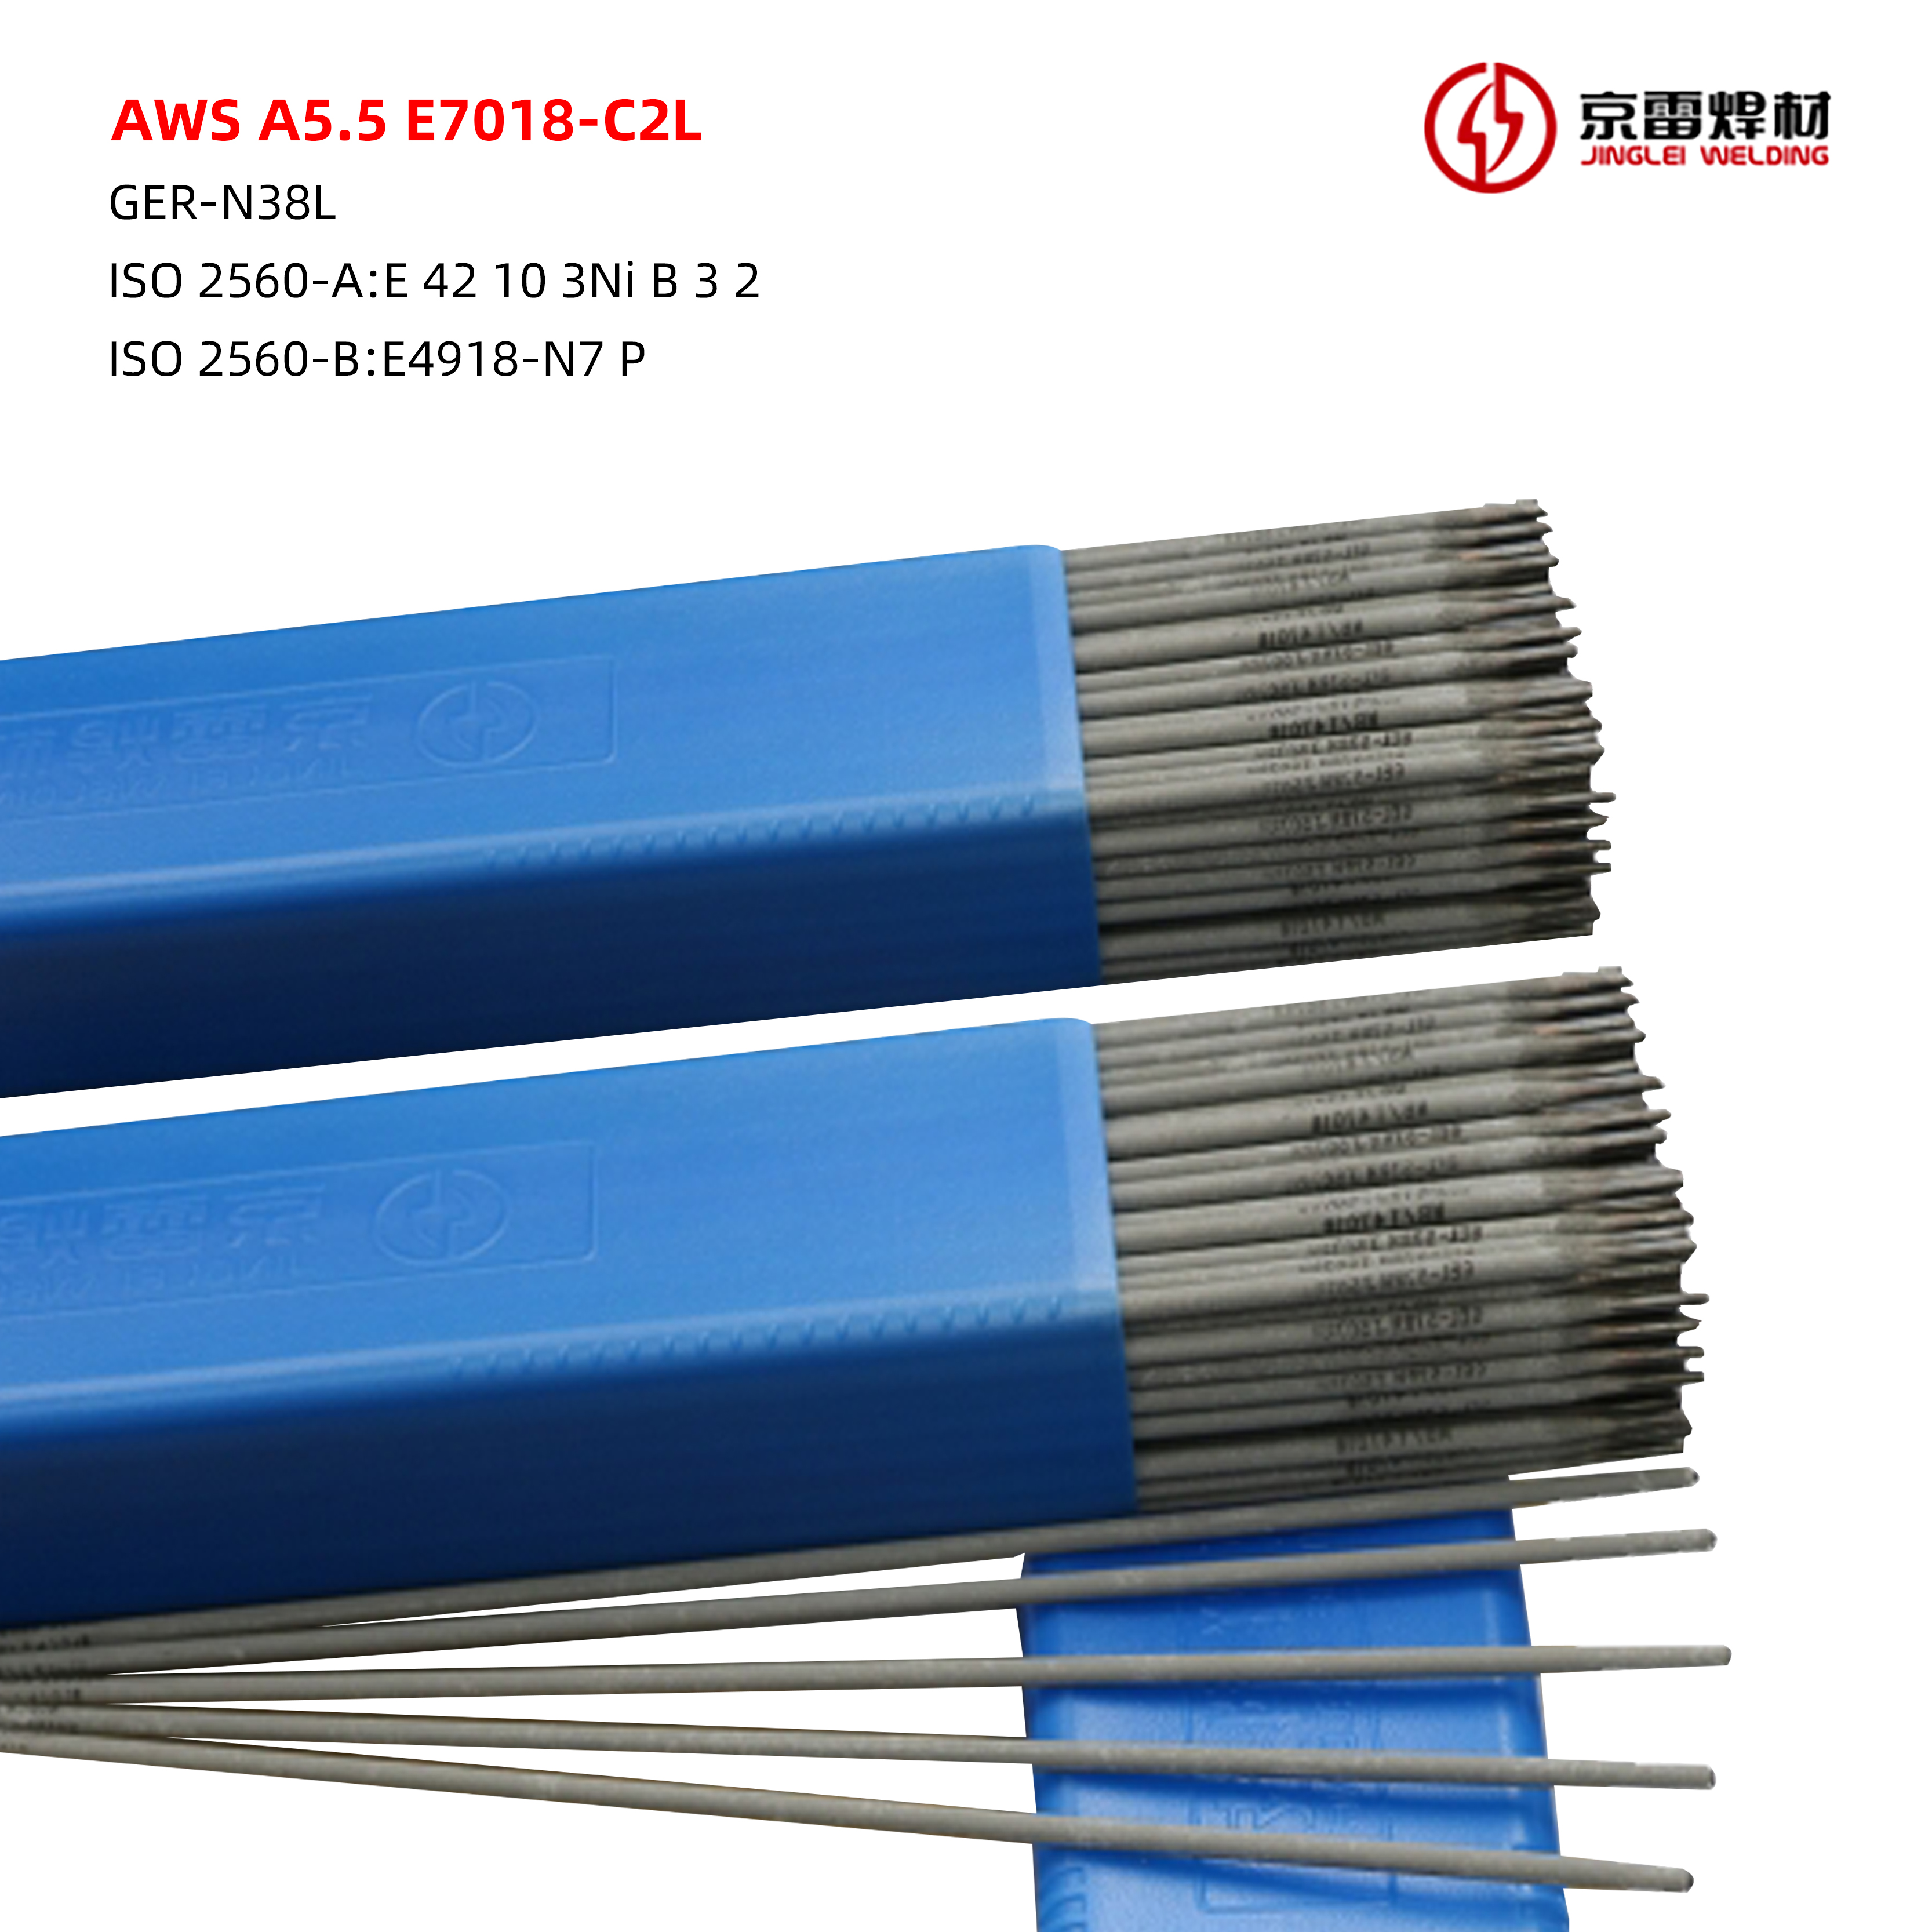 Low-Alloy Steels Manual Electrode E7018-C2L HEC – three, Haiyang MSR welding wire coil